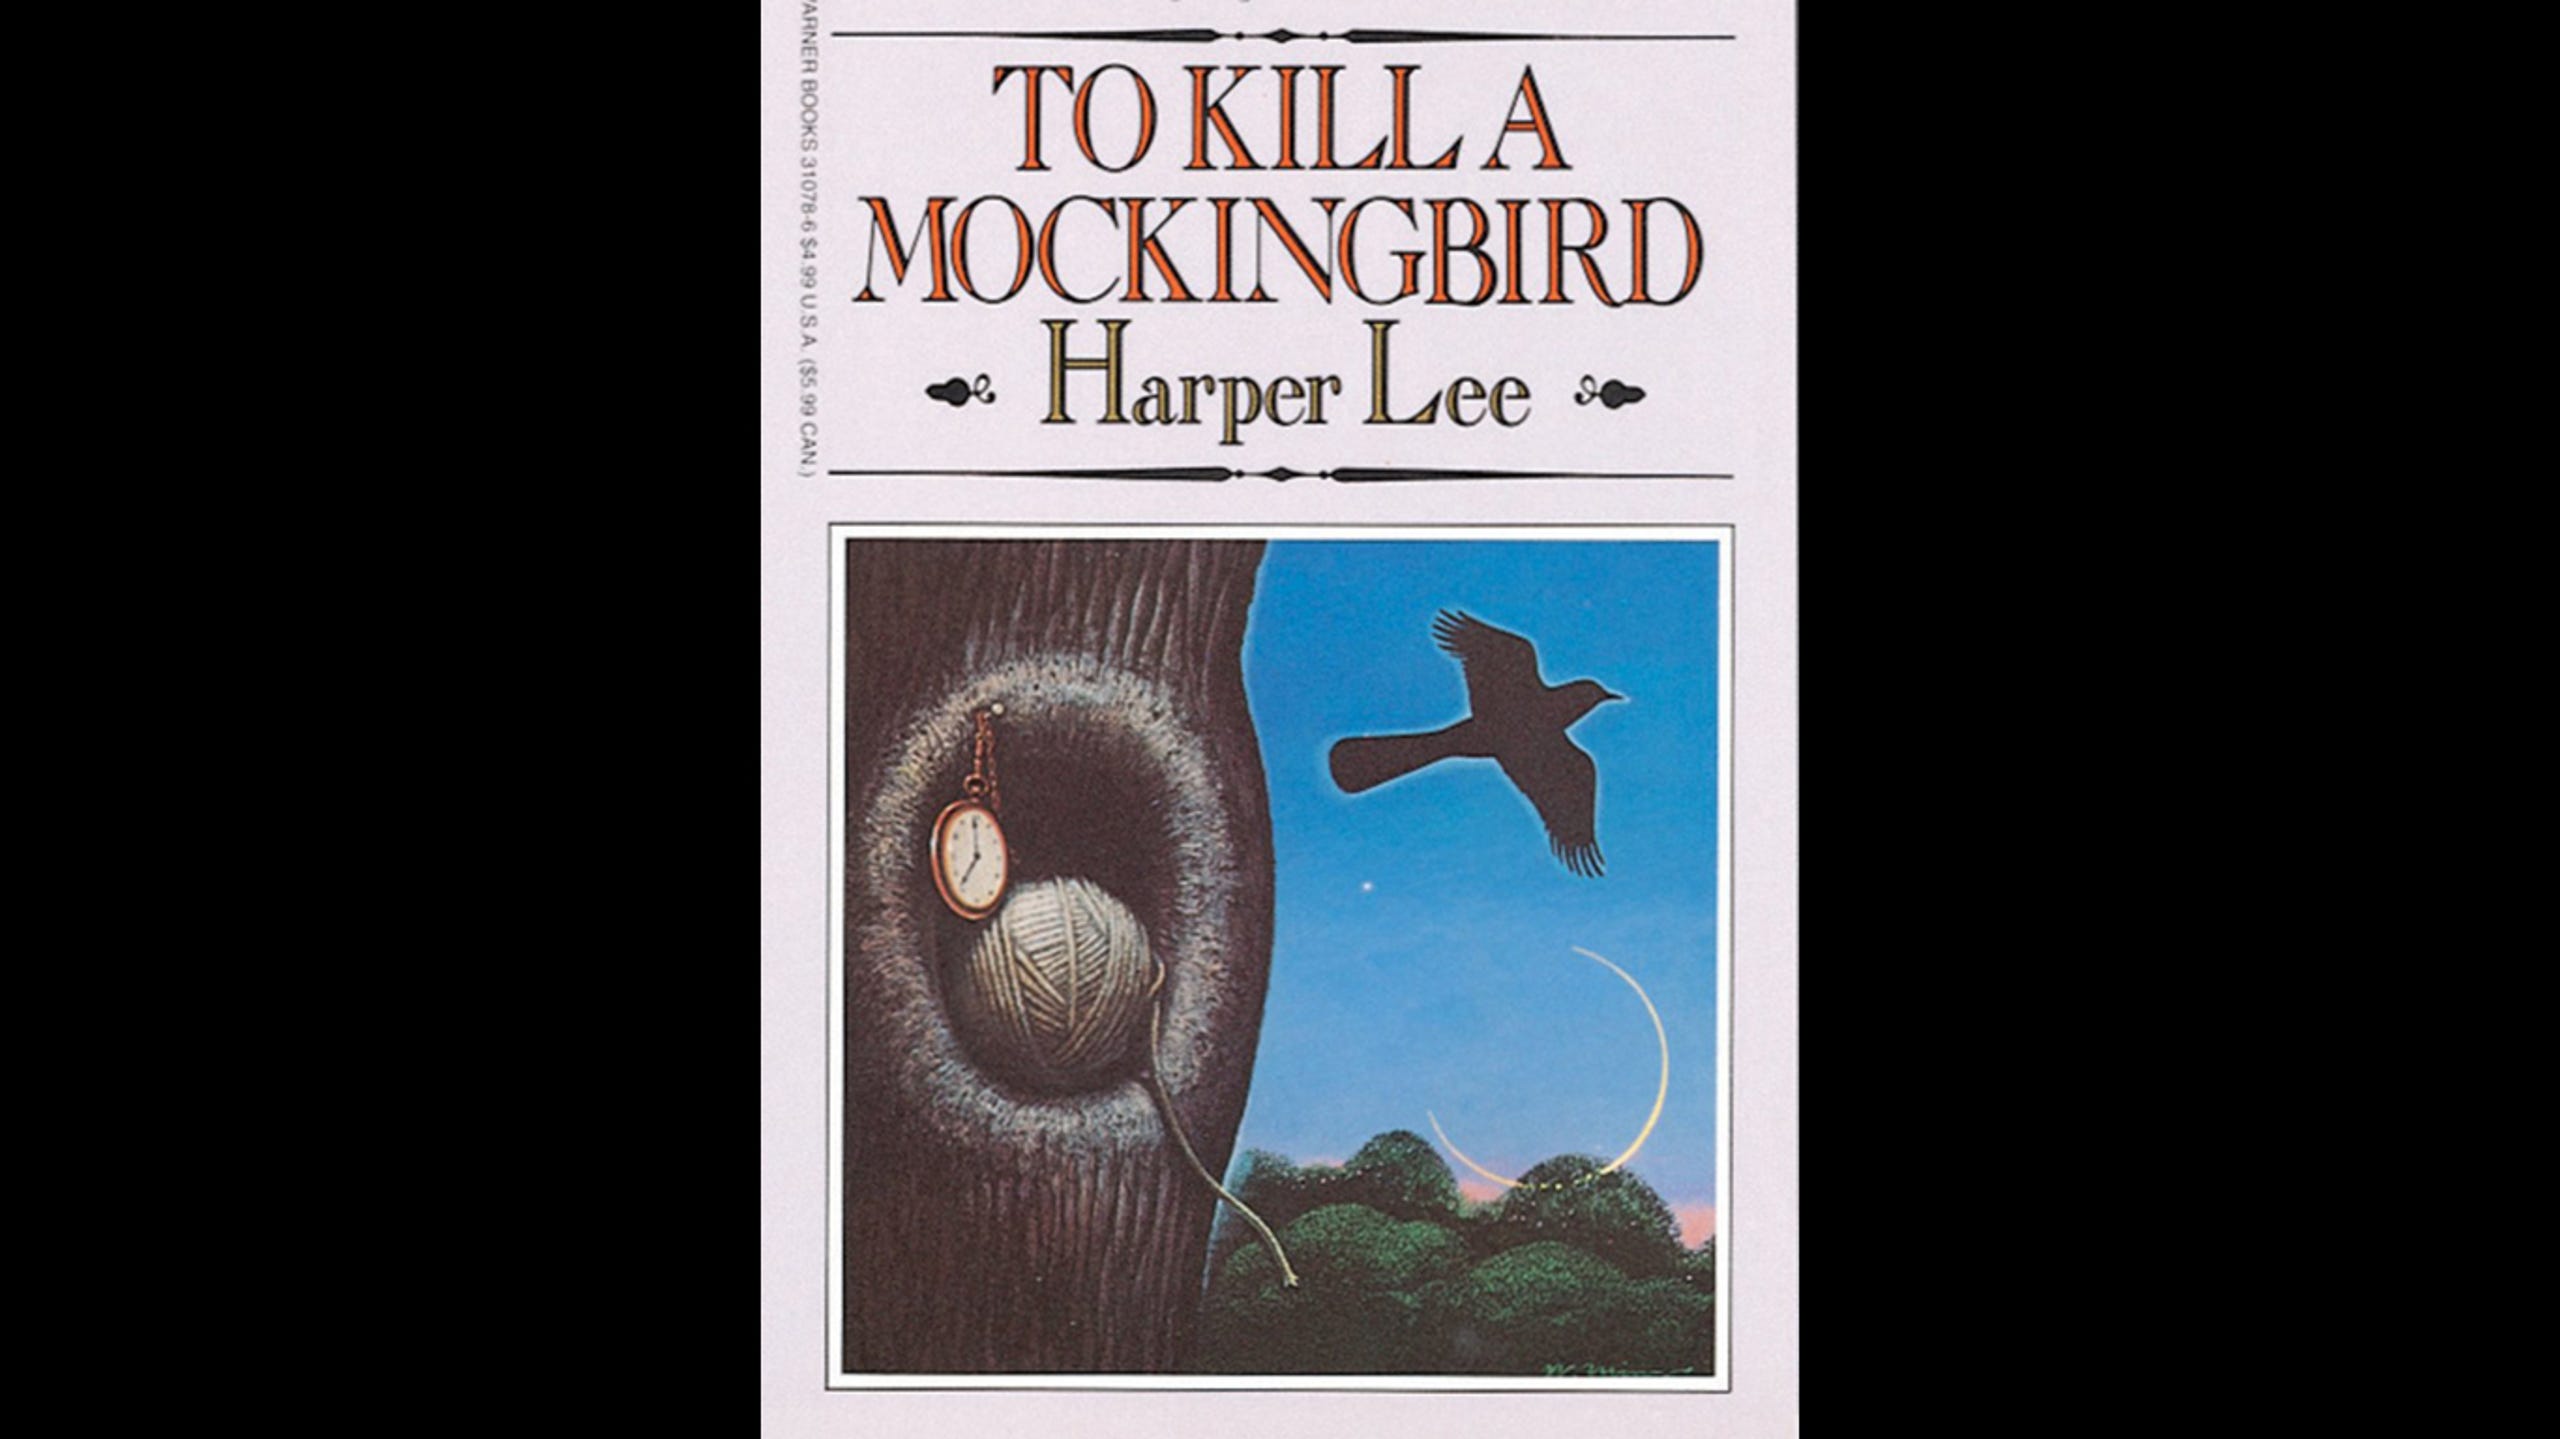 <strong>16. To Kill a Mockingbird </strong><strong>• Author:</strong> Harper Lee <strong>• Originally published in:</strong> 1960 <strong>• </strong>"Its depiction of intolerance and racism and notions of justice and the need for accountability and civic conscience is as relevant today as when it was written," Uruburu said. "It also offers a life-affirming message about love and family which we also need today." This is a "simpler book" that has trickled down the curriculum, according to Buster. "And [is] now taught to students who are too young to appreciate [it]."